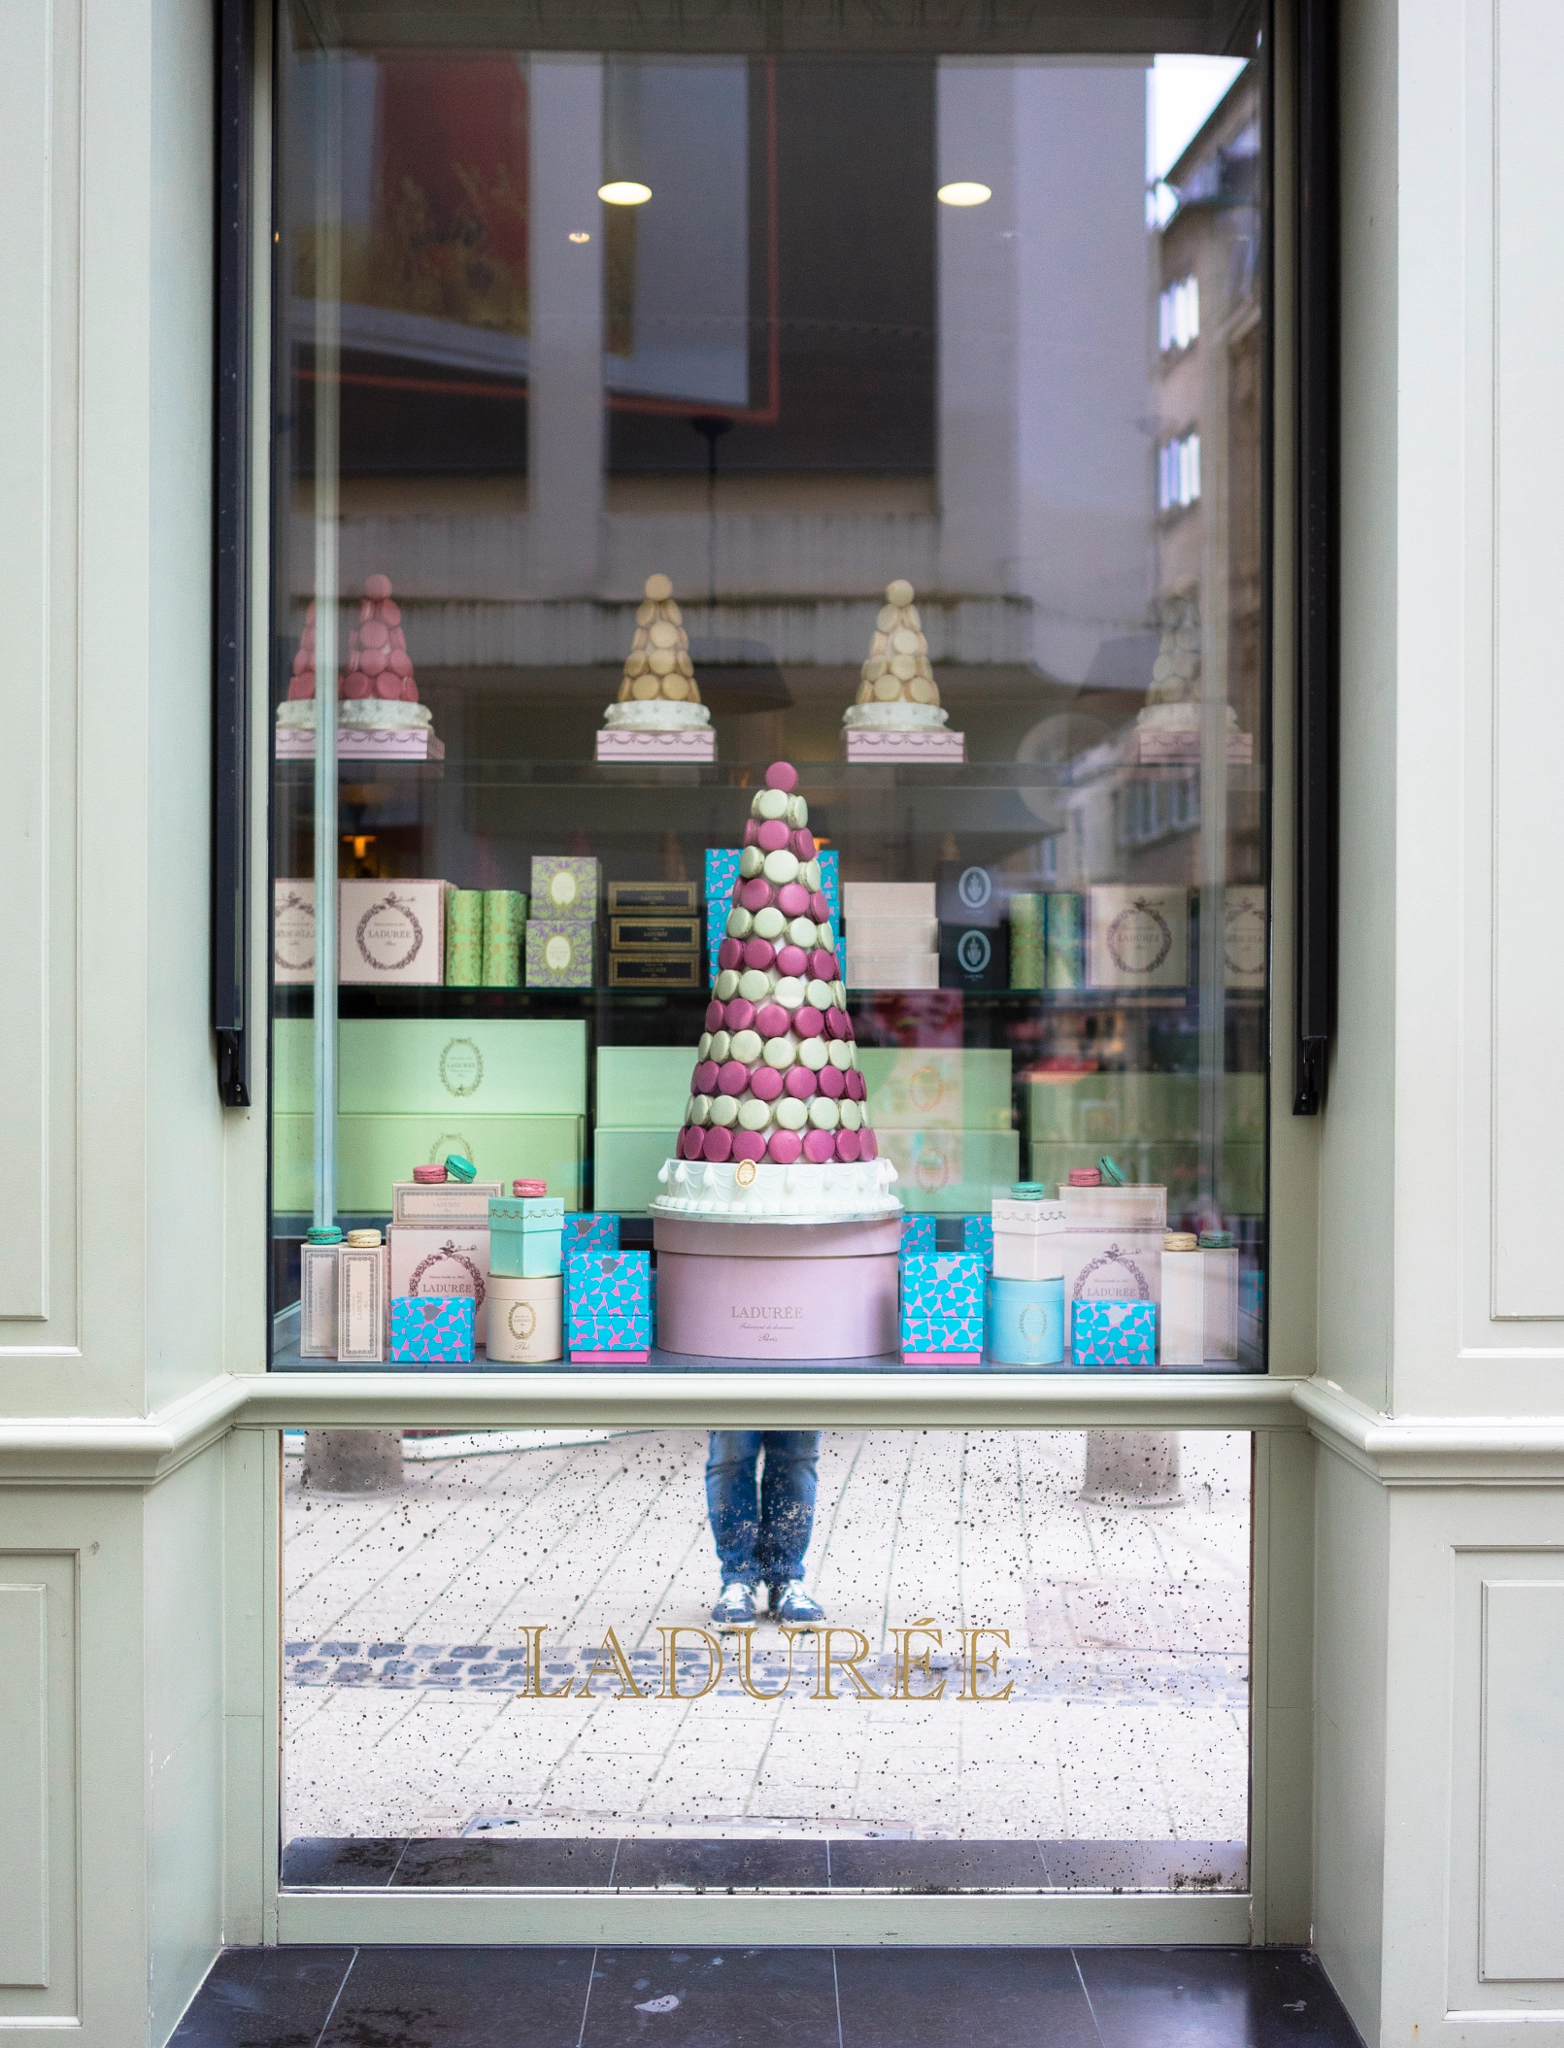 Leica T (Typ 701) + Summicron T 1:2 23 ASPH. sample photo. Macarons photography